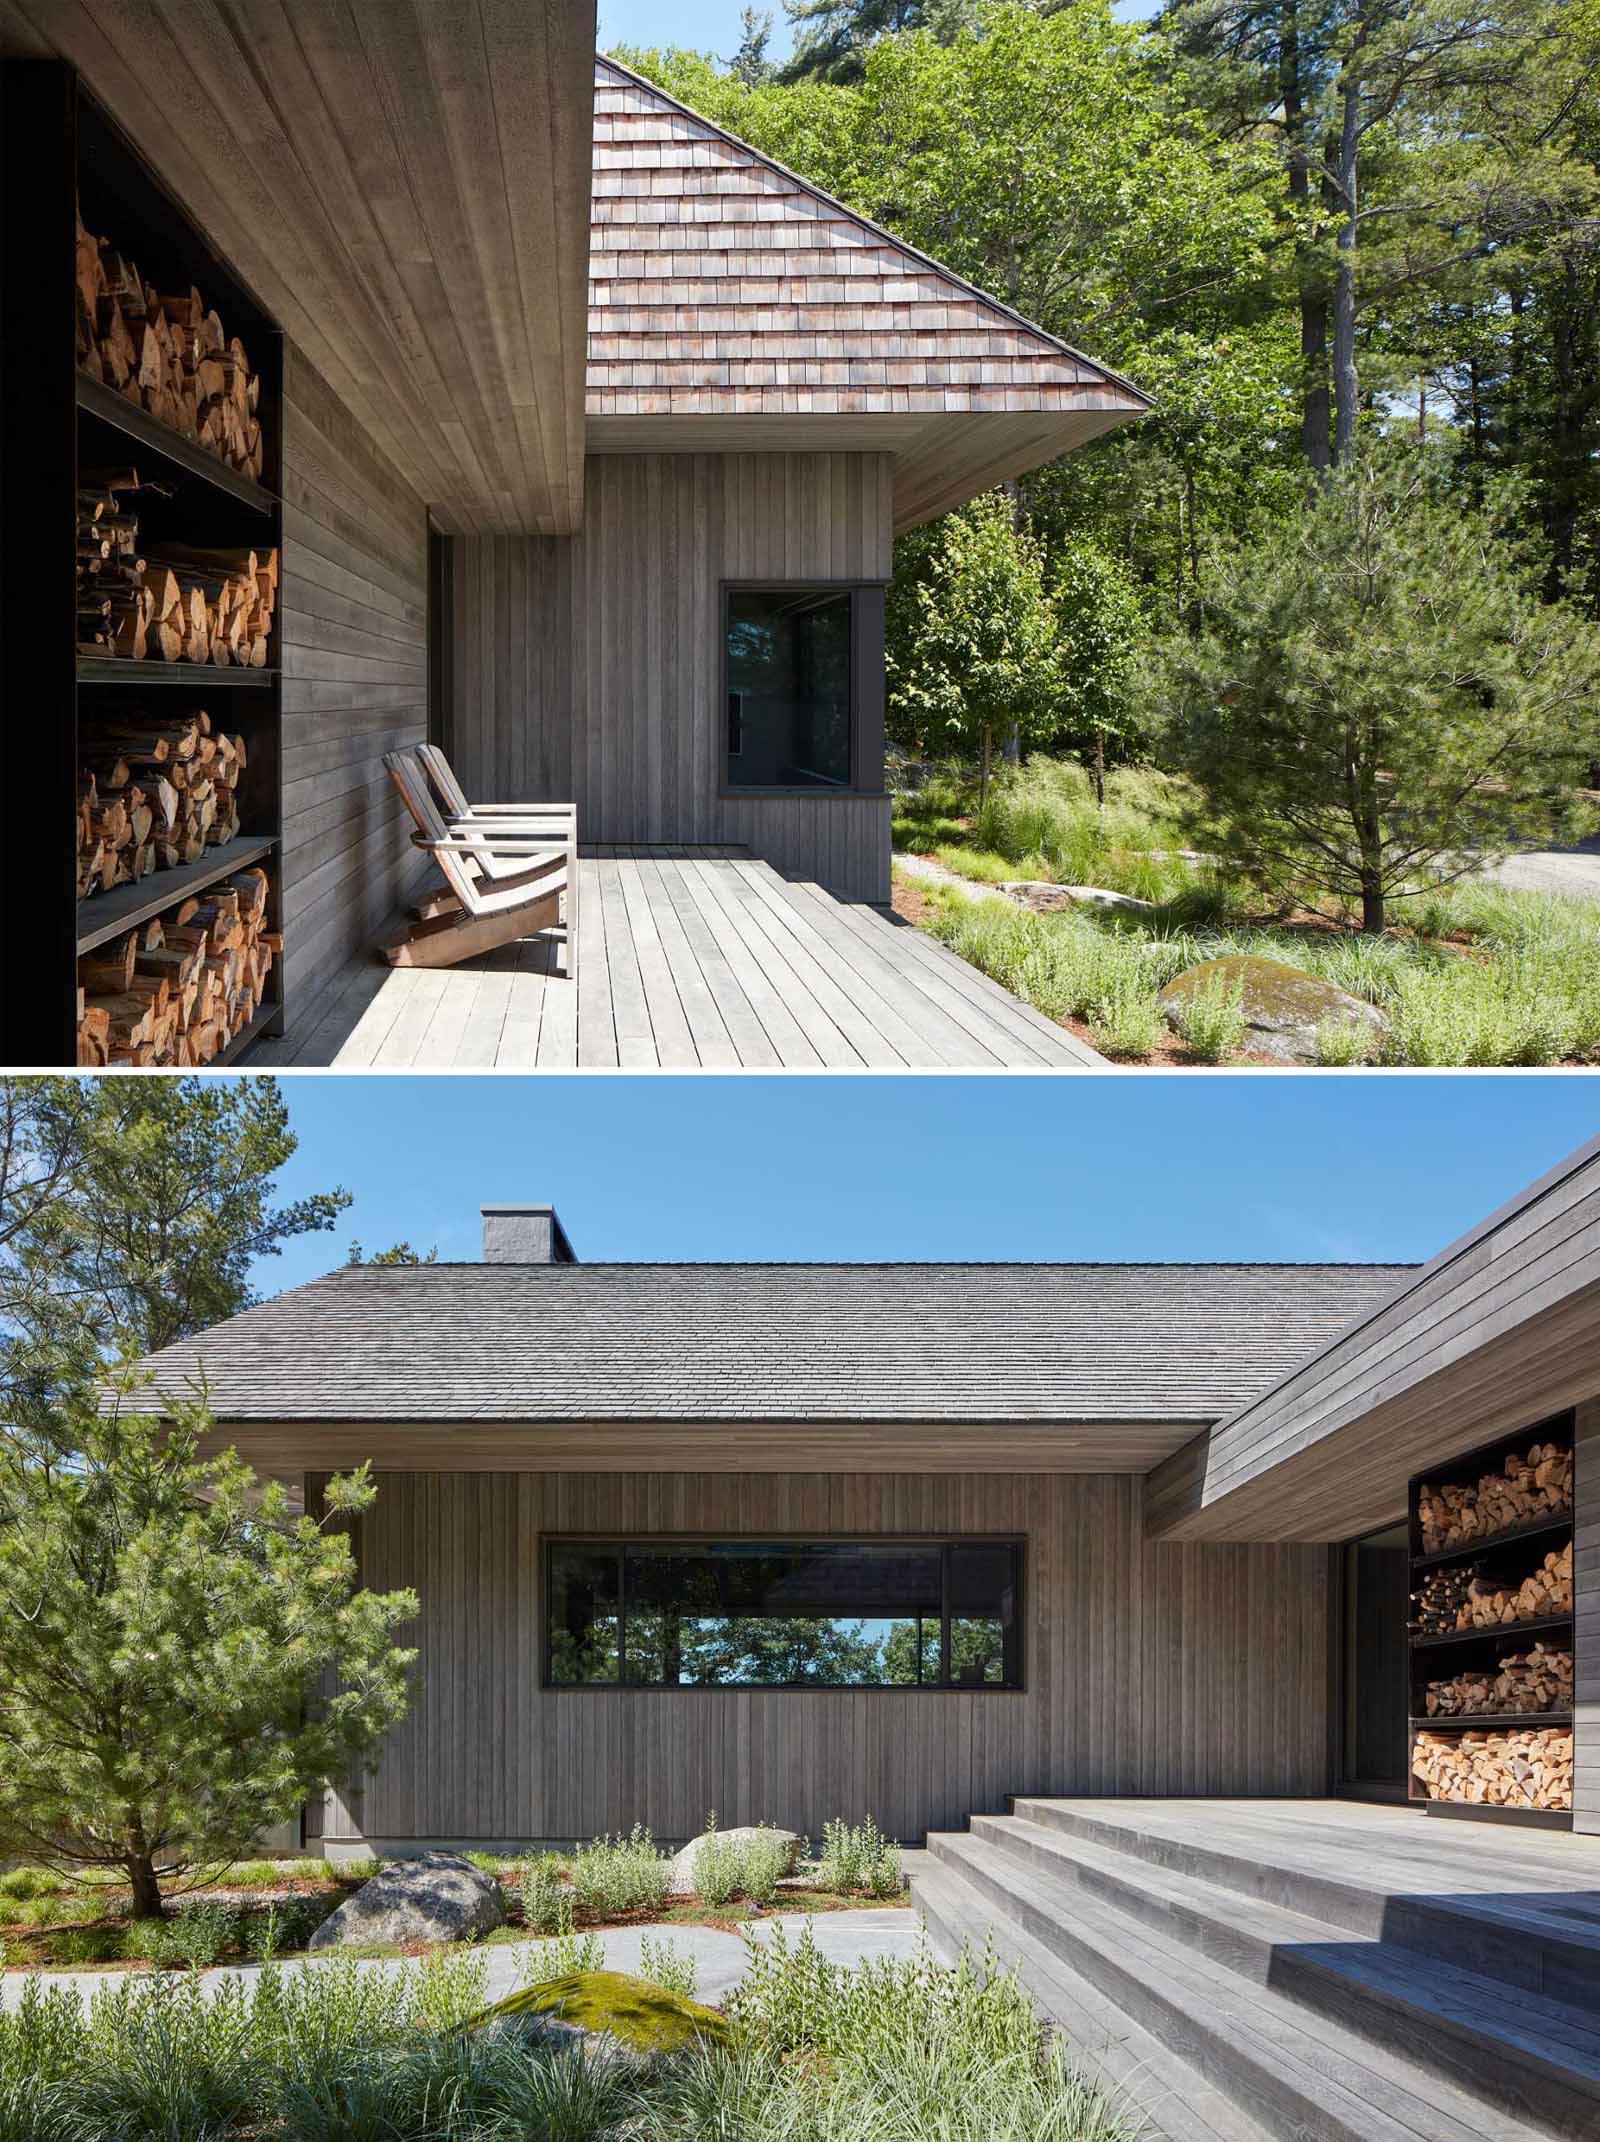 The front entry features a built-in firewood storage rack made of hot-rolled blackened steel, while the cottage's exaggerated gabled rooftops and pronounced chimney stacks are a playful take on the cabin vernacular.